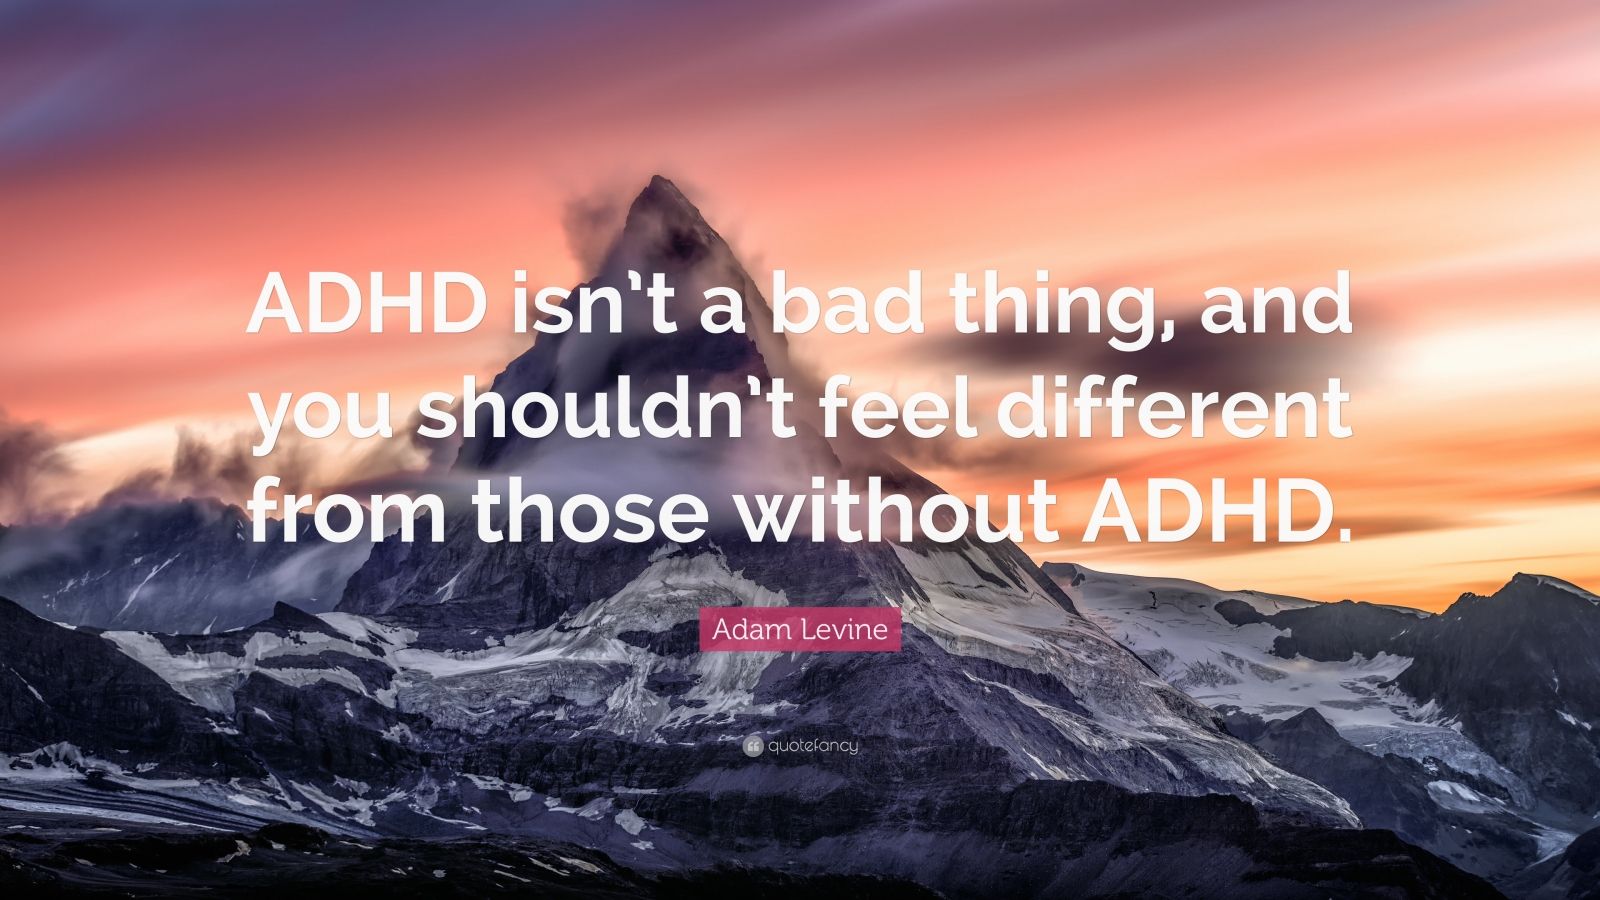 Adam Levine Quote: "ADHD isn't a bad thing, and you ...